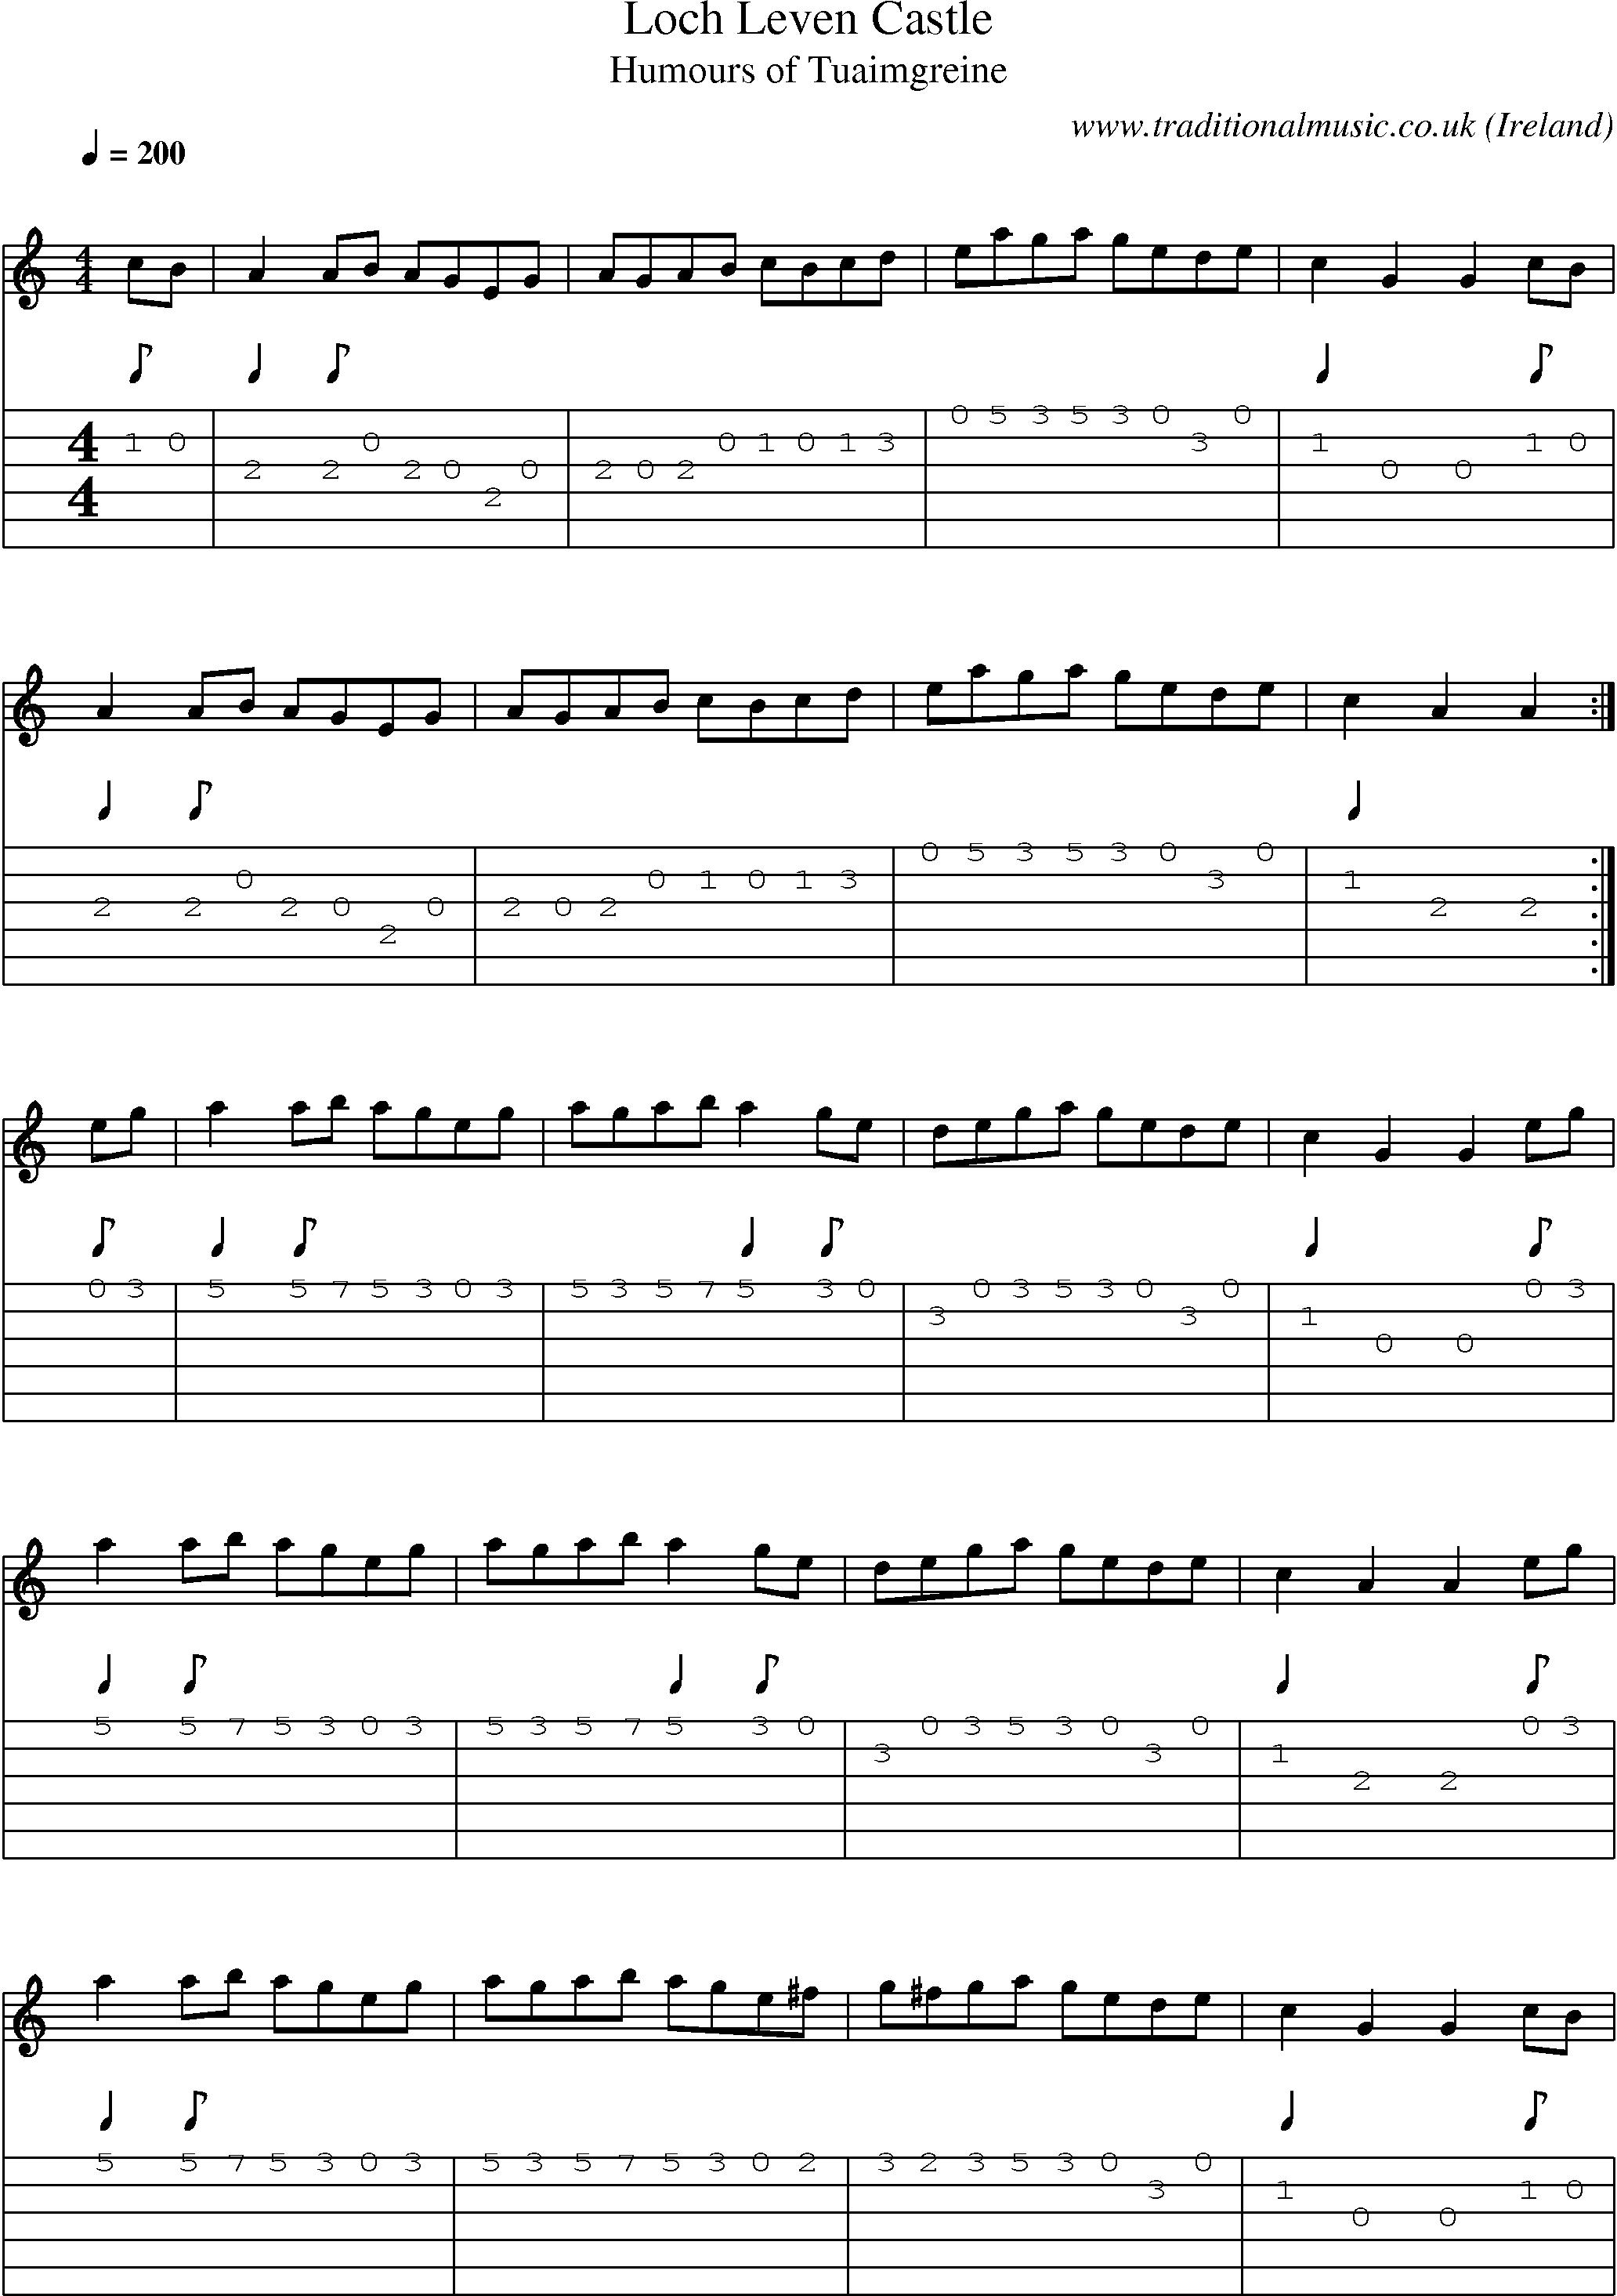 Music Score and Guitar Tabs for Loch Leven Castle